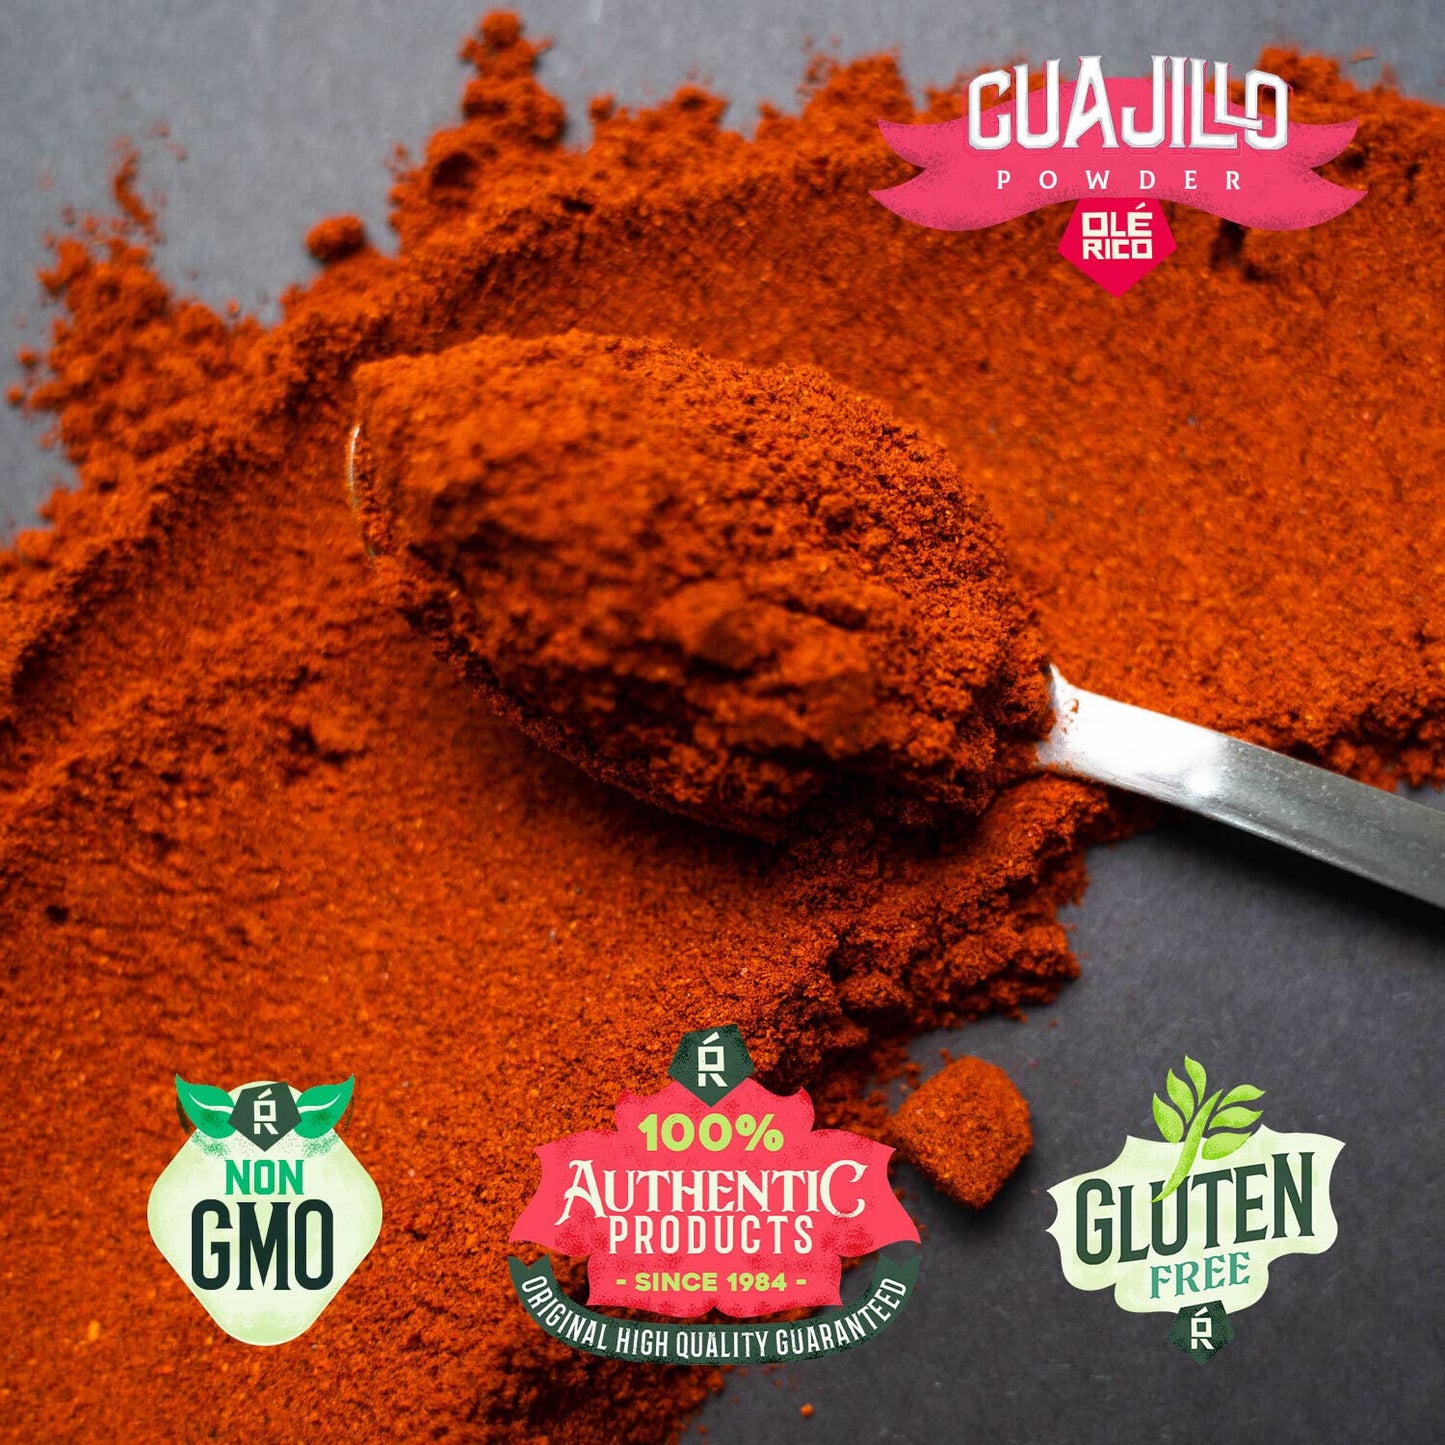 OLÉ RICO Chile Powder 3 Pack Bundle (12oz Total) Includes: Guajillo Chili Powder, Ancho Chili Powder Spice, and Chile de Arbol - The Spicy Trio, Mexican Spices Made from Pure Dried Peppers